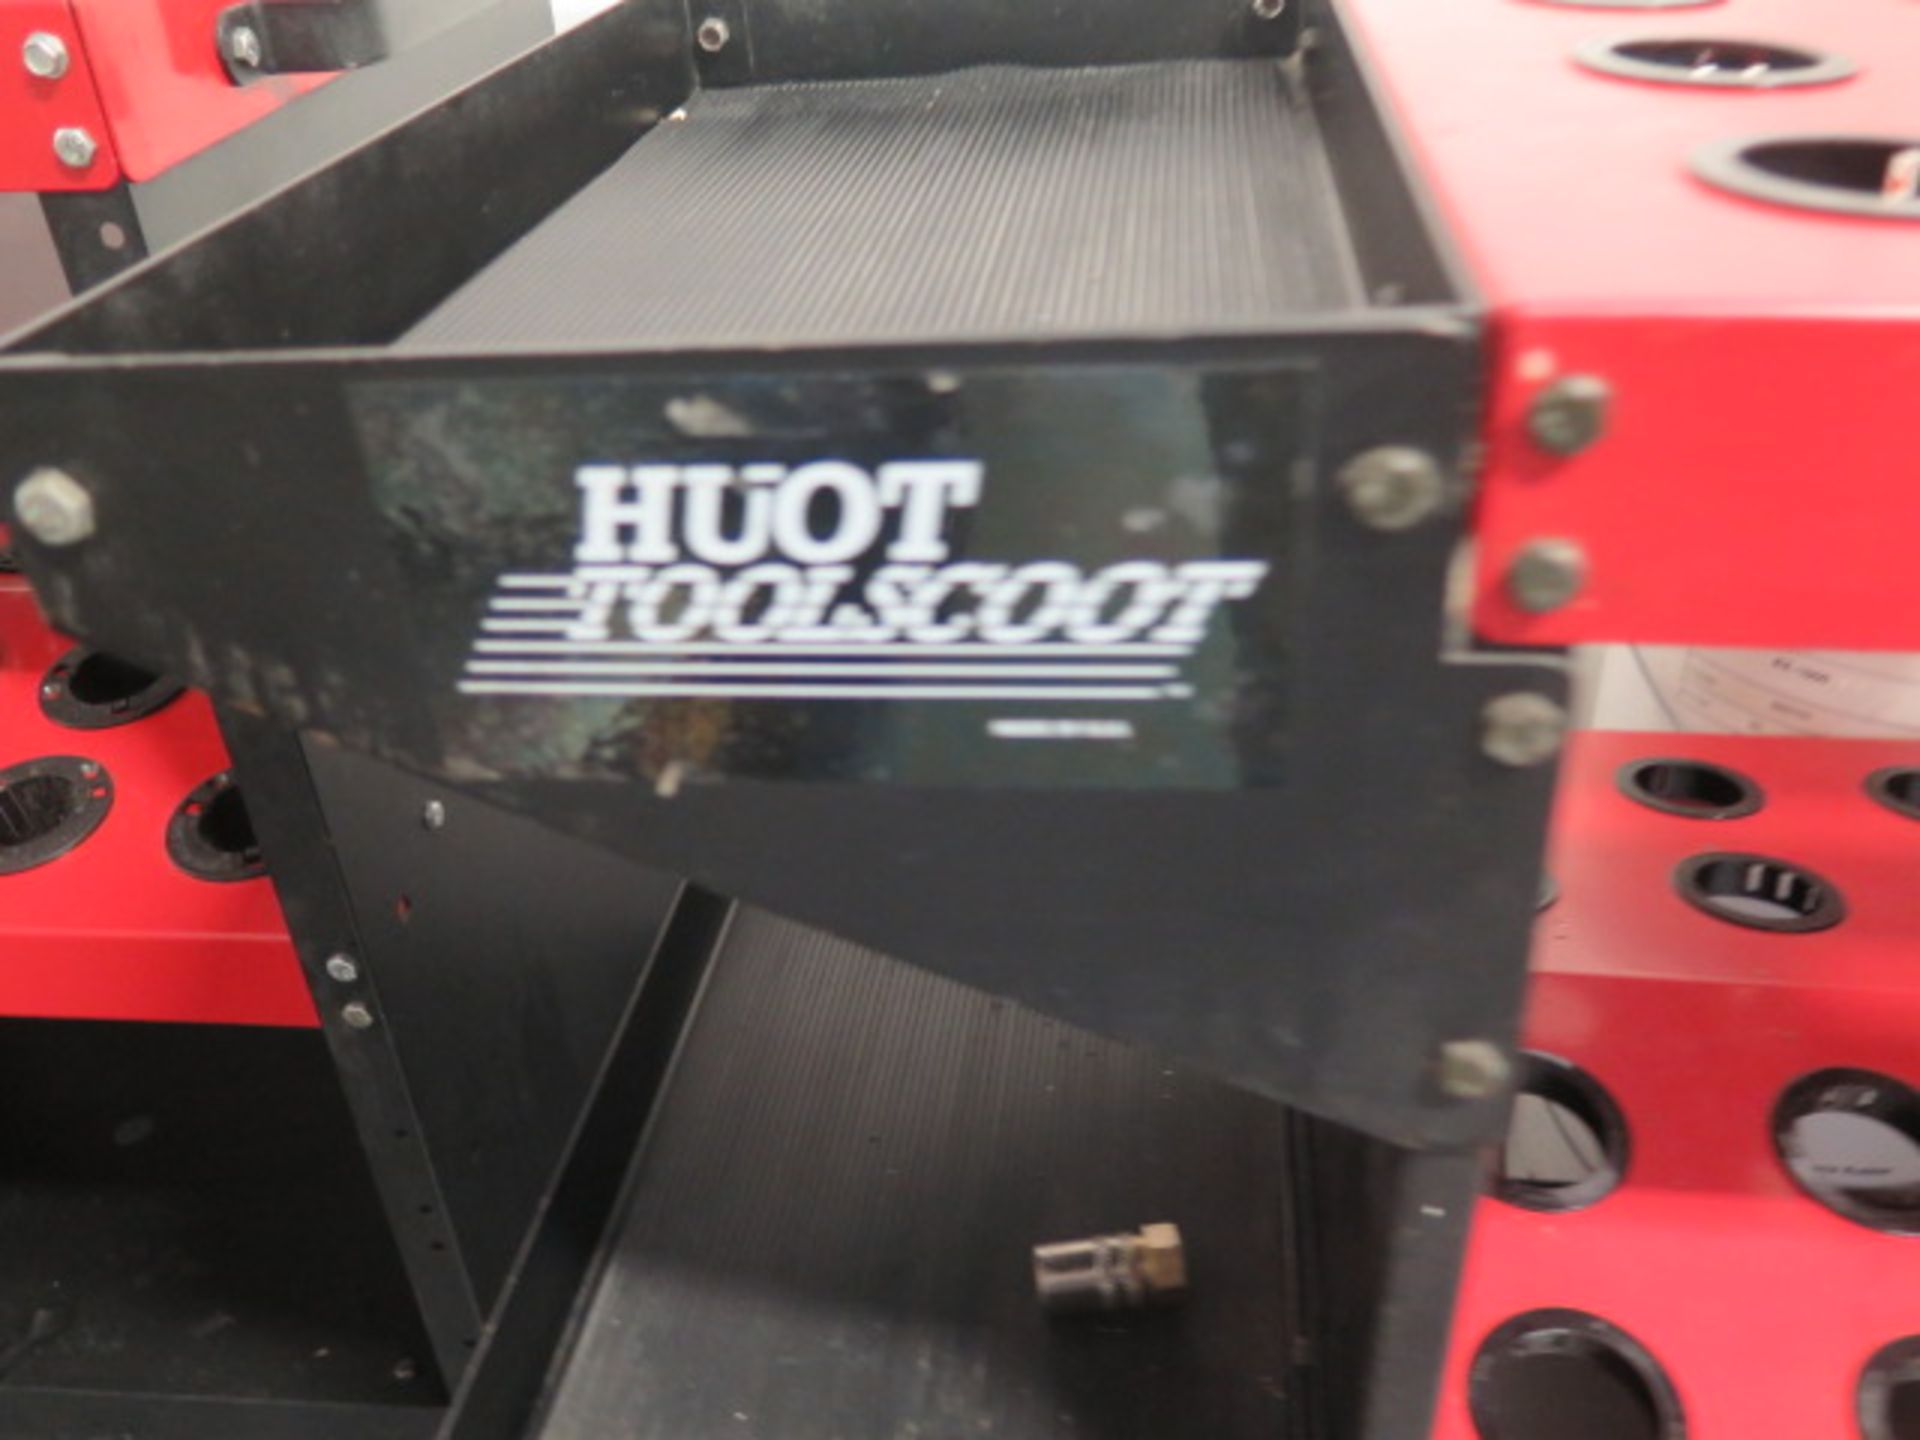 Huot "Toolscoot" 40-Taper Tooling Cart (SOLD AS-IS - NO WARRANTY) - Image 2 of 4